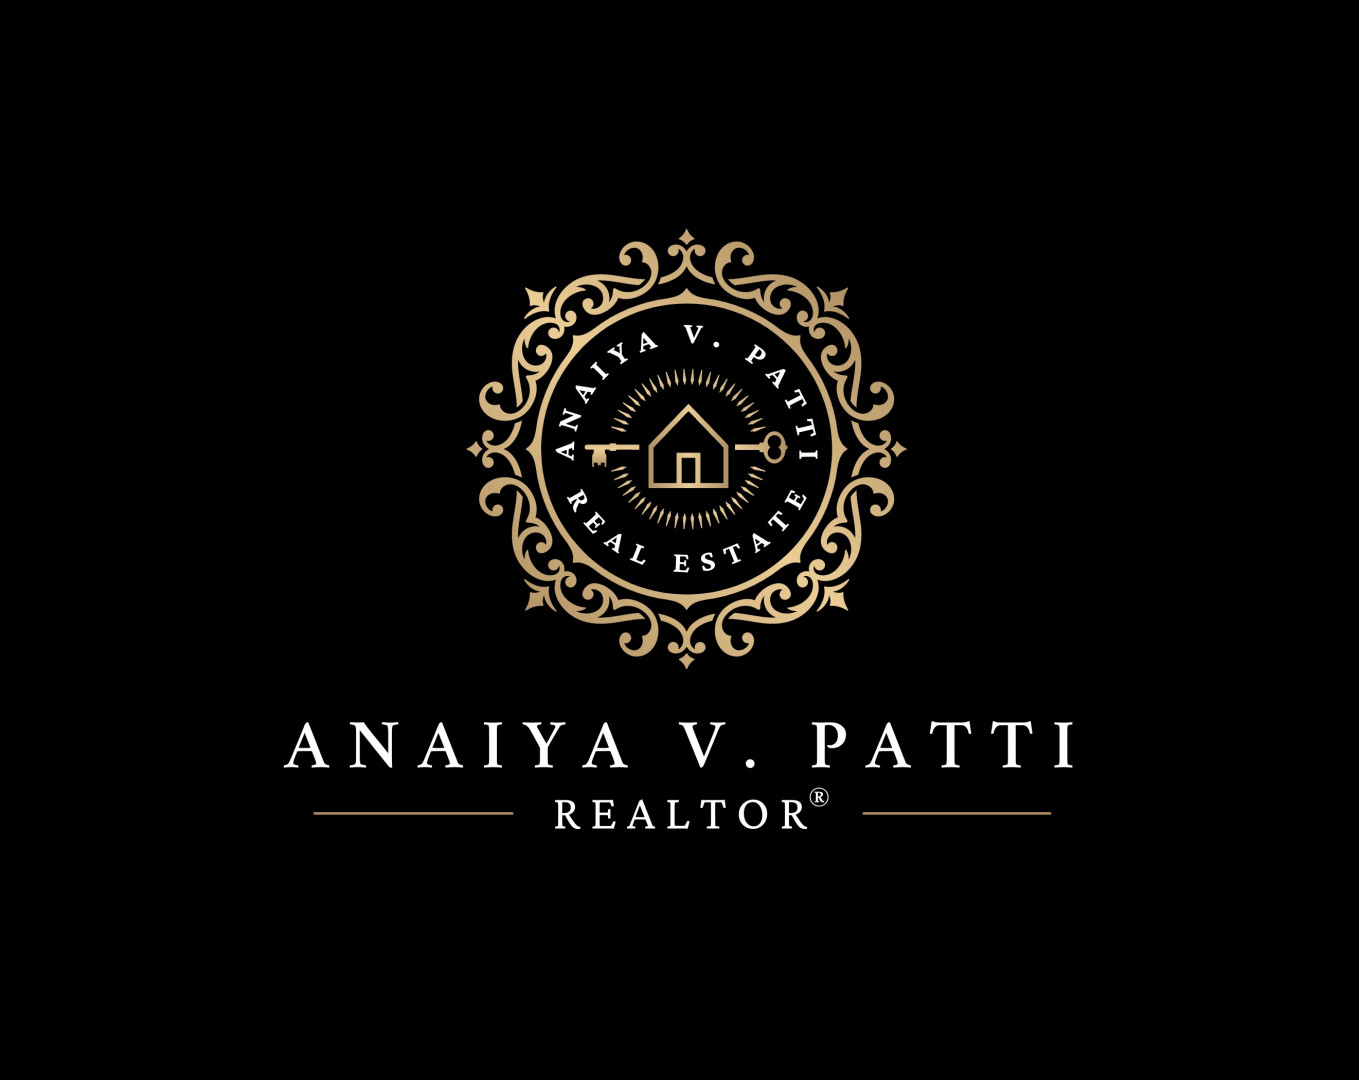 WELCOME ANAIYA V. PATTI TO OUR DEERBROOK FAMILY!